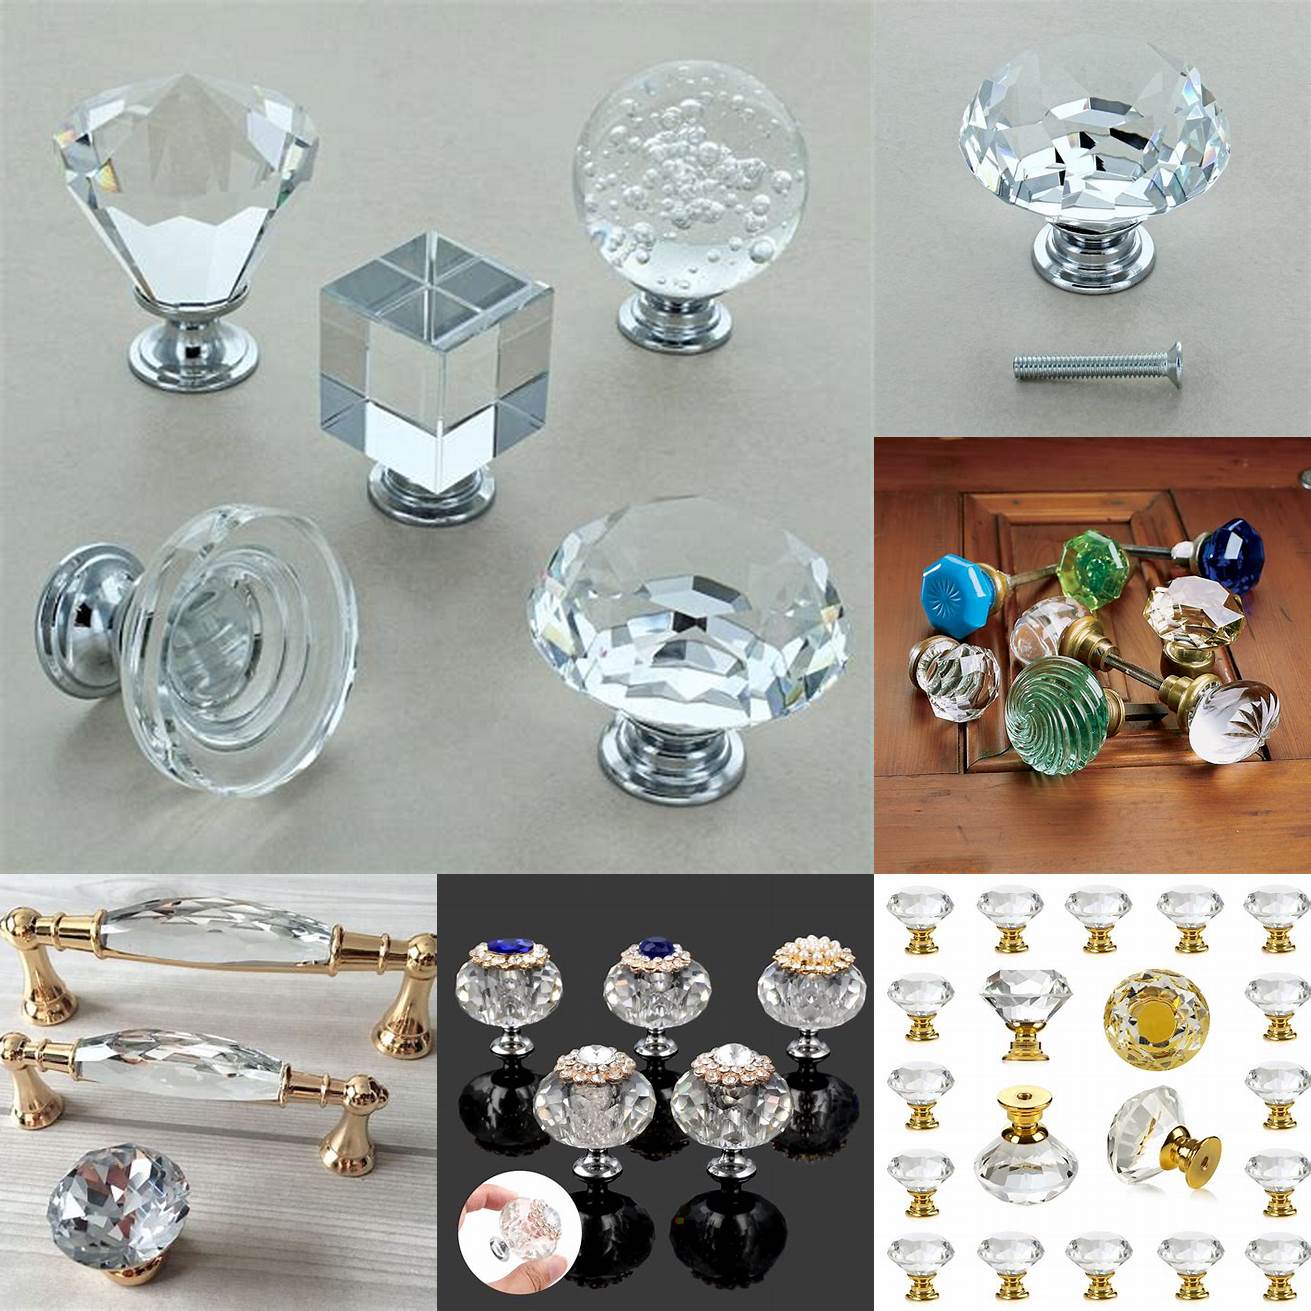 Image Idea 4 Glass knobs and pulls